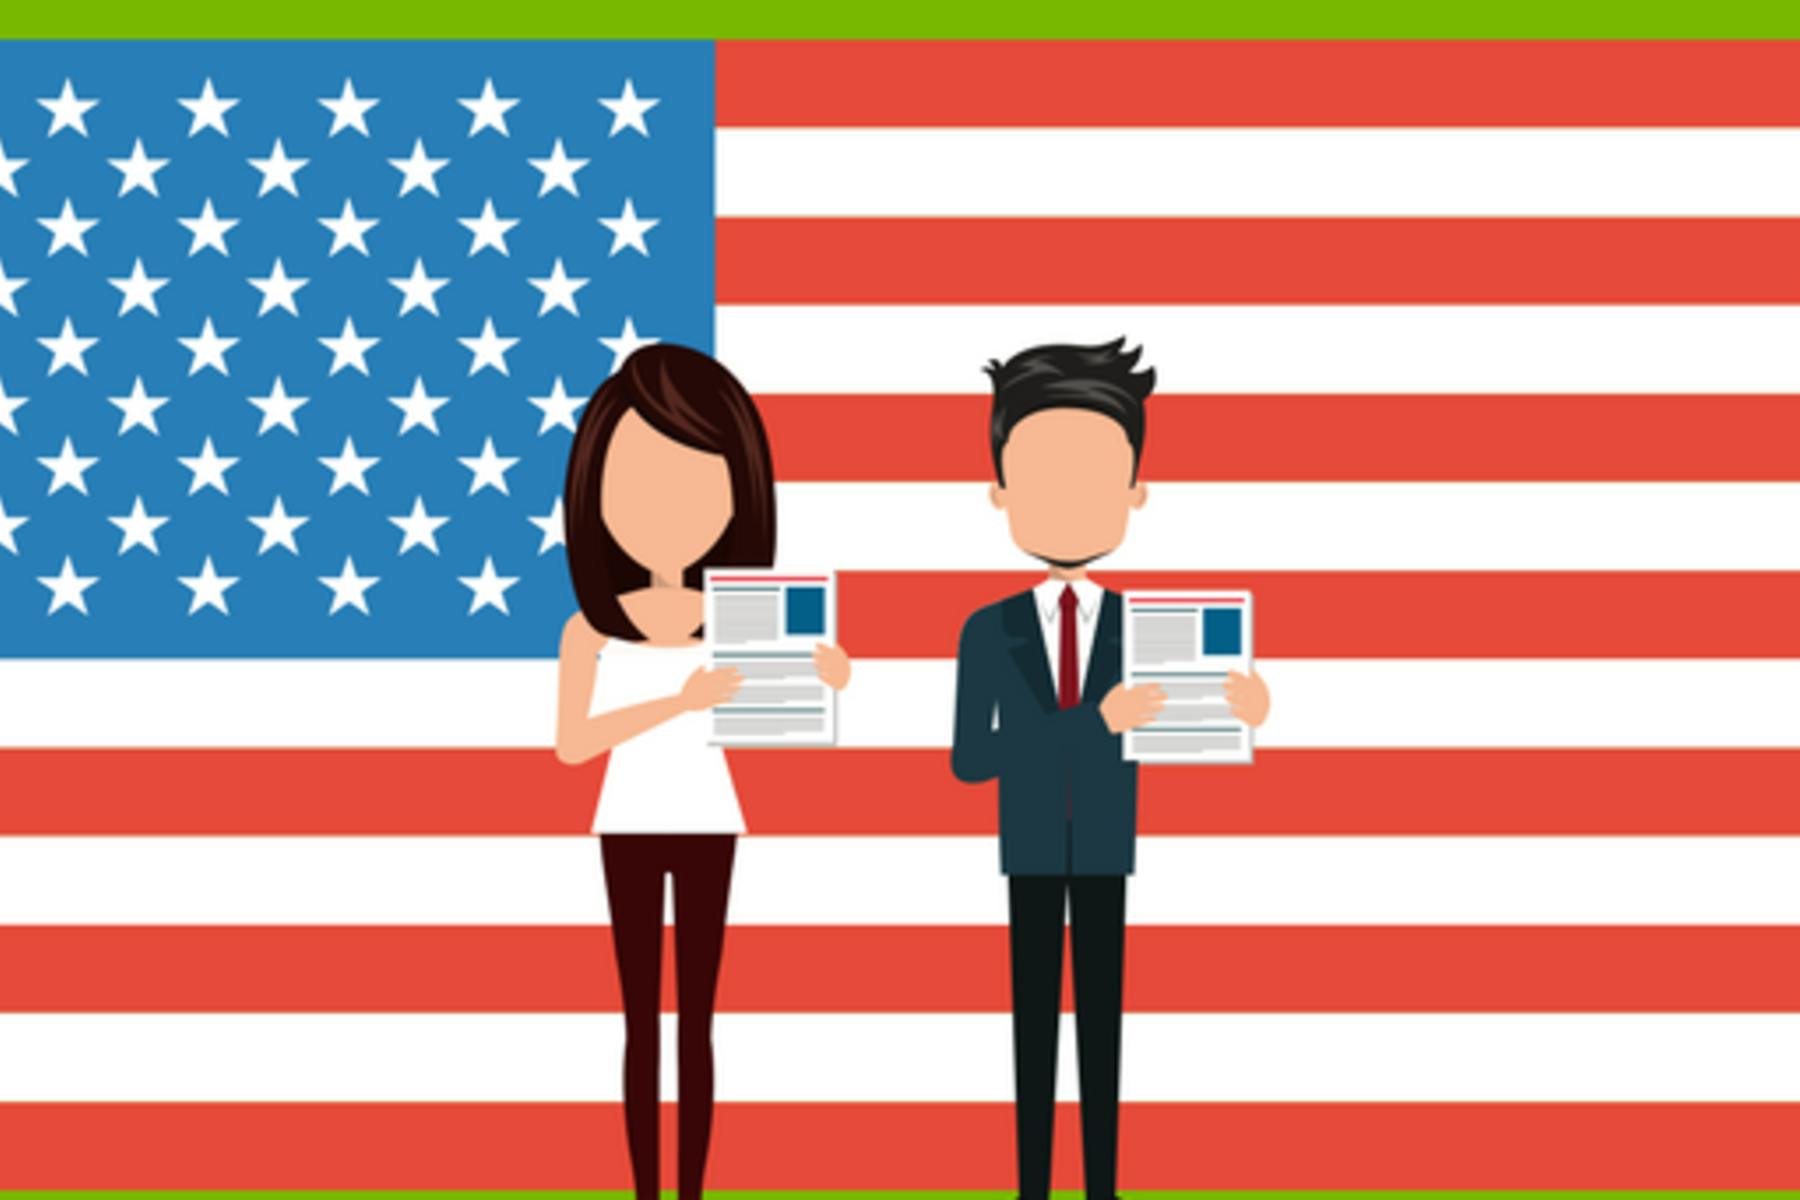 An illustration of two people standing in front of the USA flag.